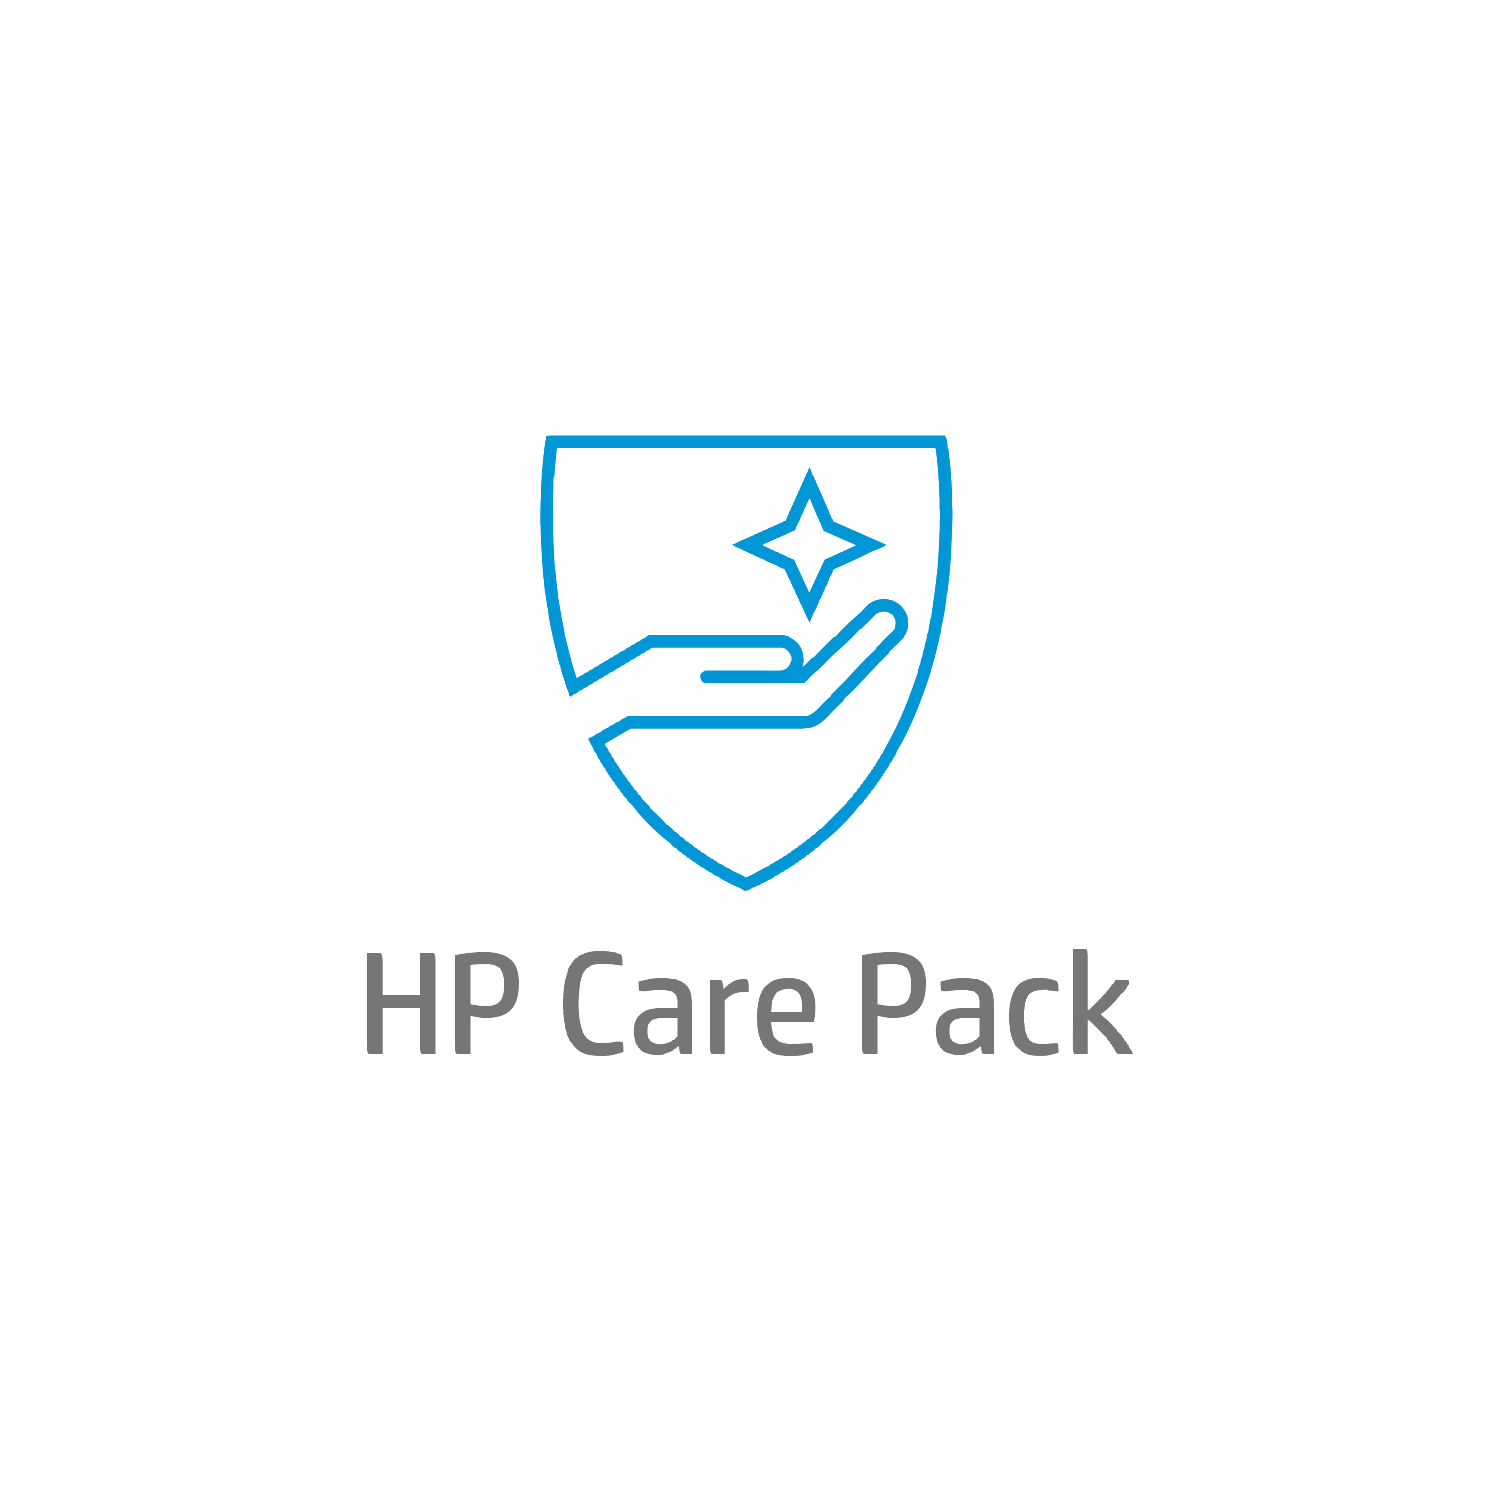 Bild von HP 4y Active Care Next Business Day Response Onsite w/1x DLE NB HW Supp, Active Care, Remote and Onsite, In warranty, Standard workdays - 9 hours, 4 years, Next business day response